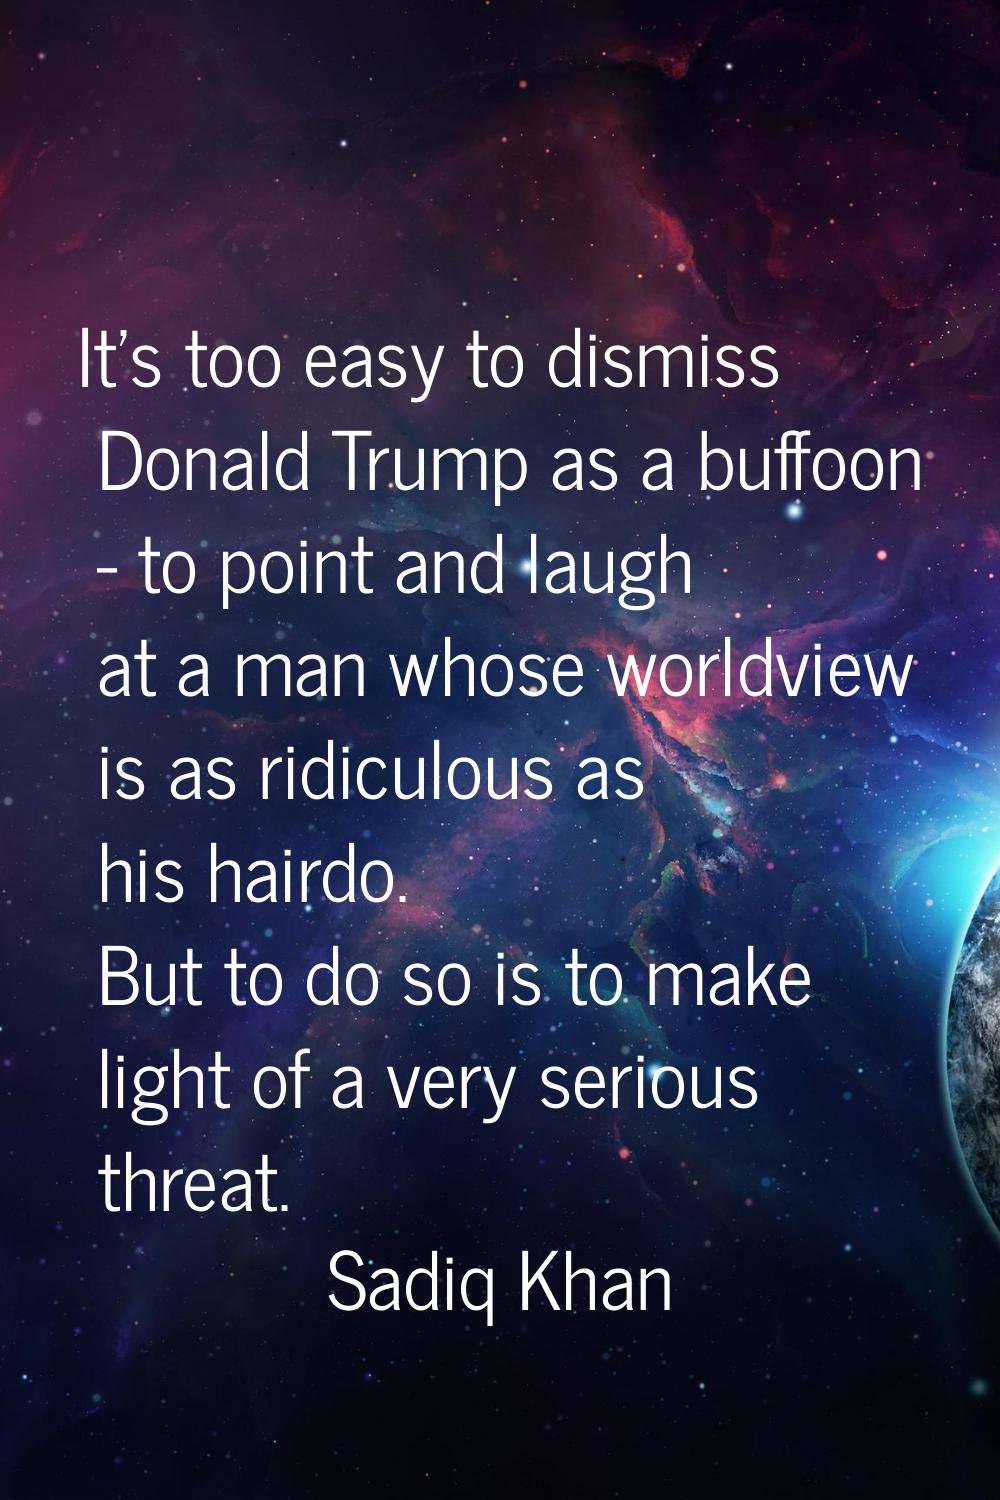 It's too easy to dismiss Donald Trump as a buffoon - to point and laugh at a man whose worldview is